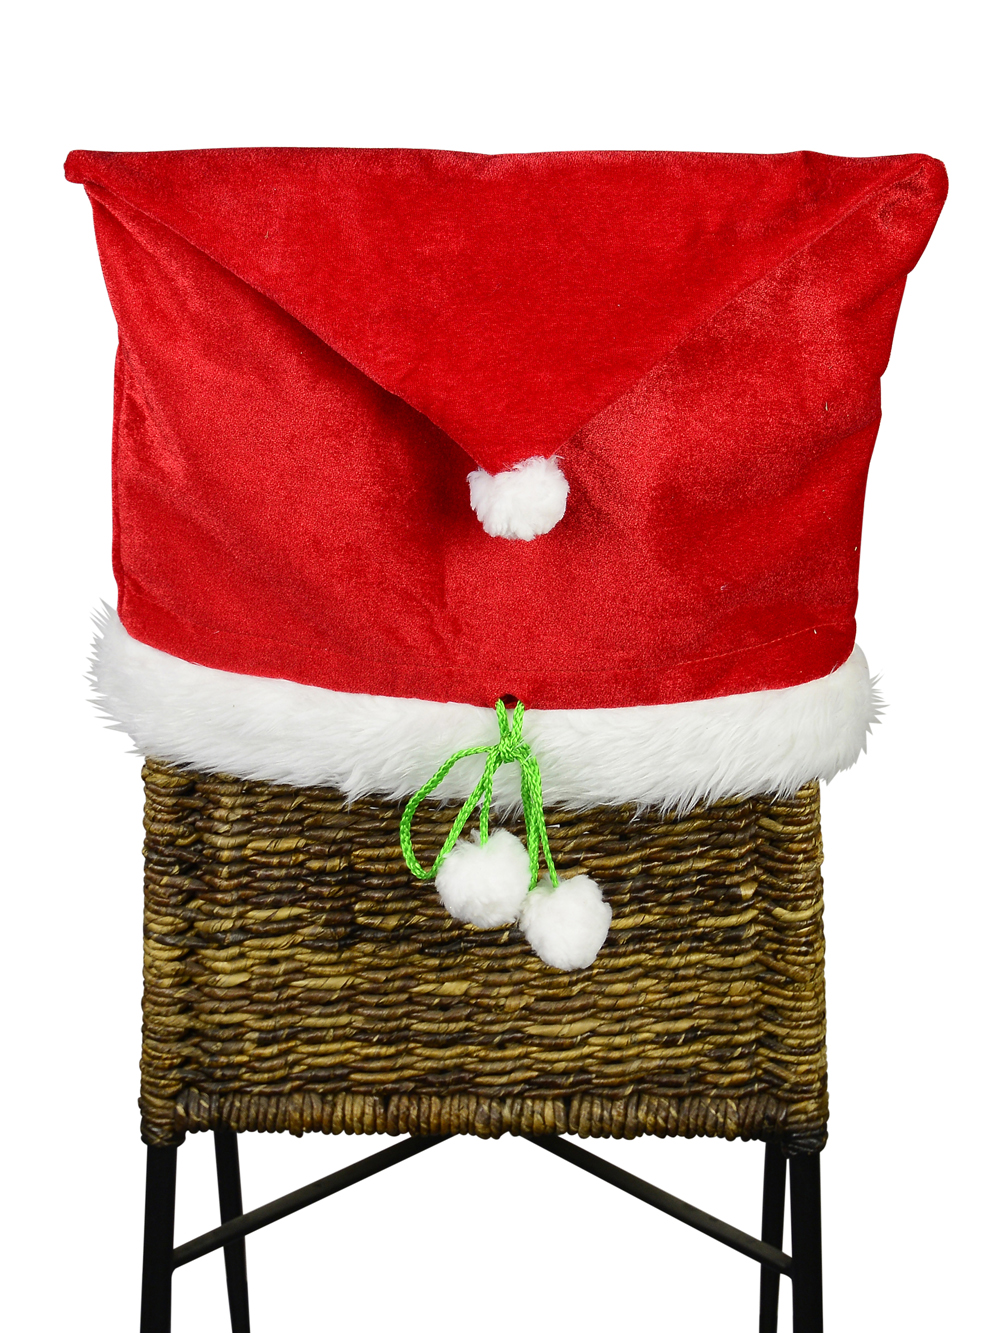 Merry Christmas Red Velvet Santa Hat Chair Cover Product Archive Buy Online From The Christmas Warehouse